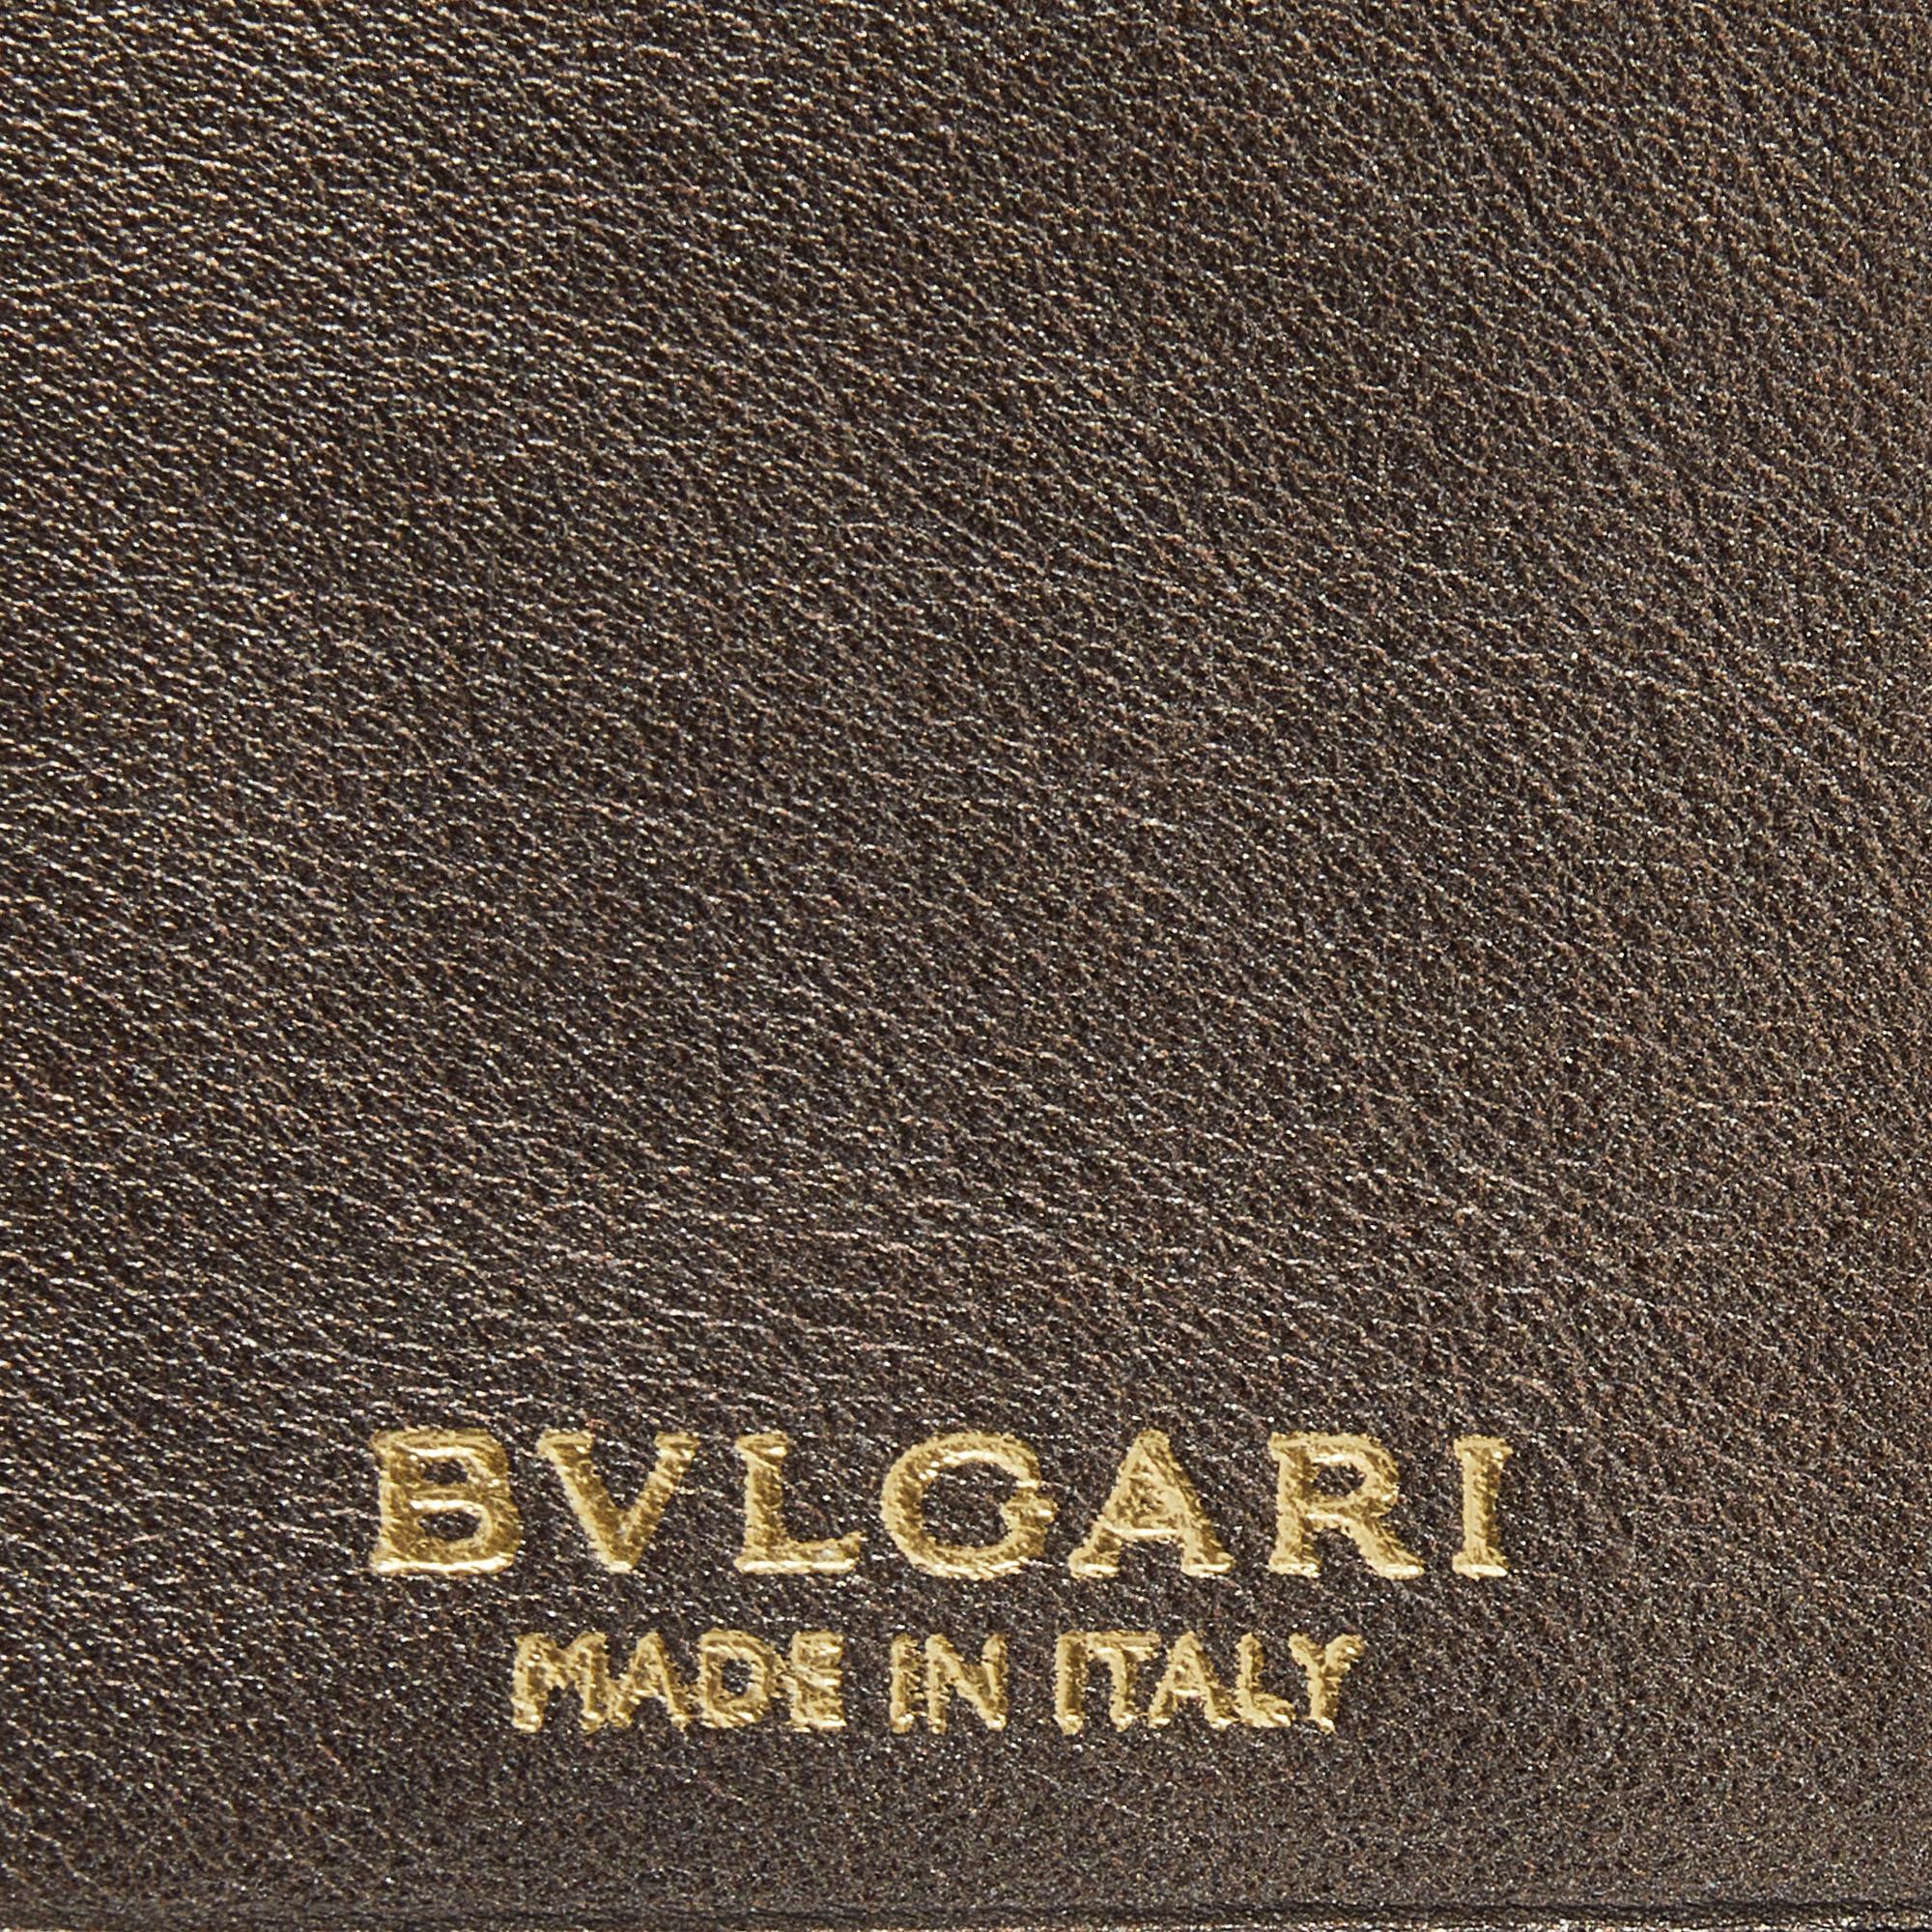 Bvlgari Metallic Brown Leather Double Ring Flap Compact Wallet 3